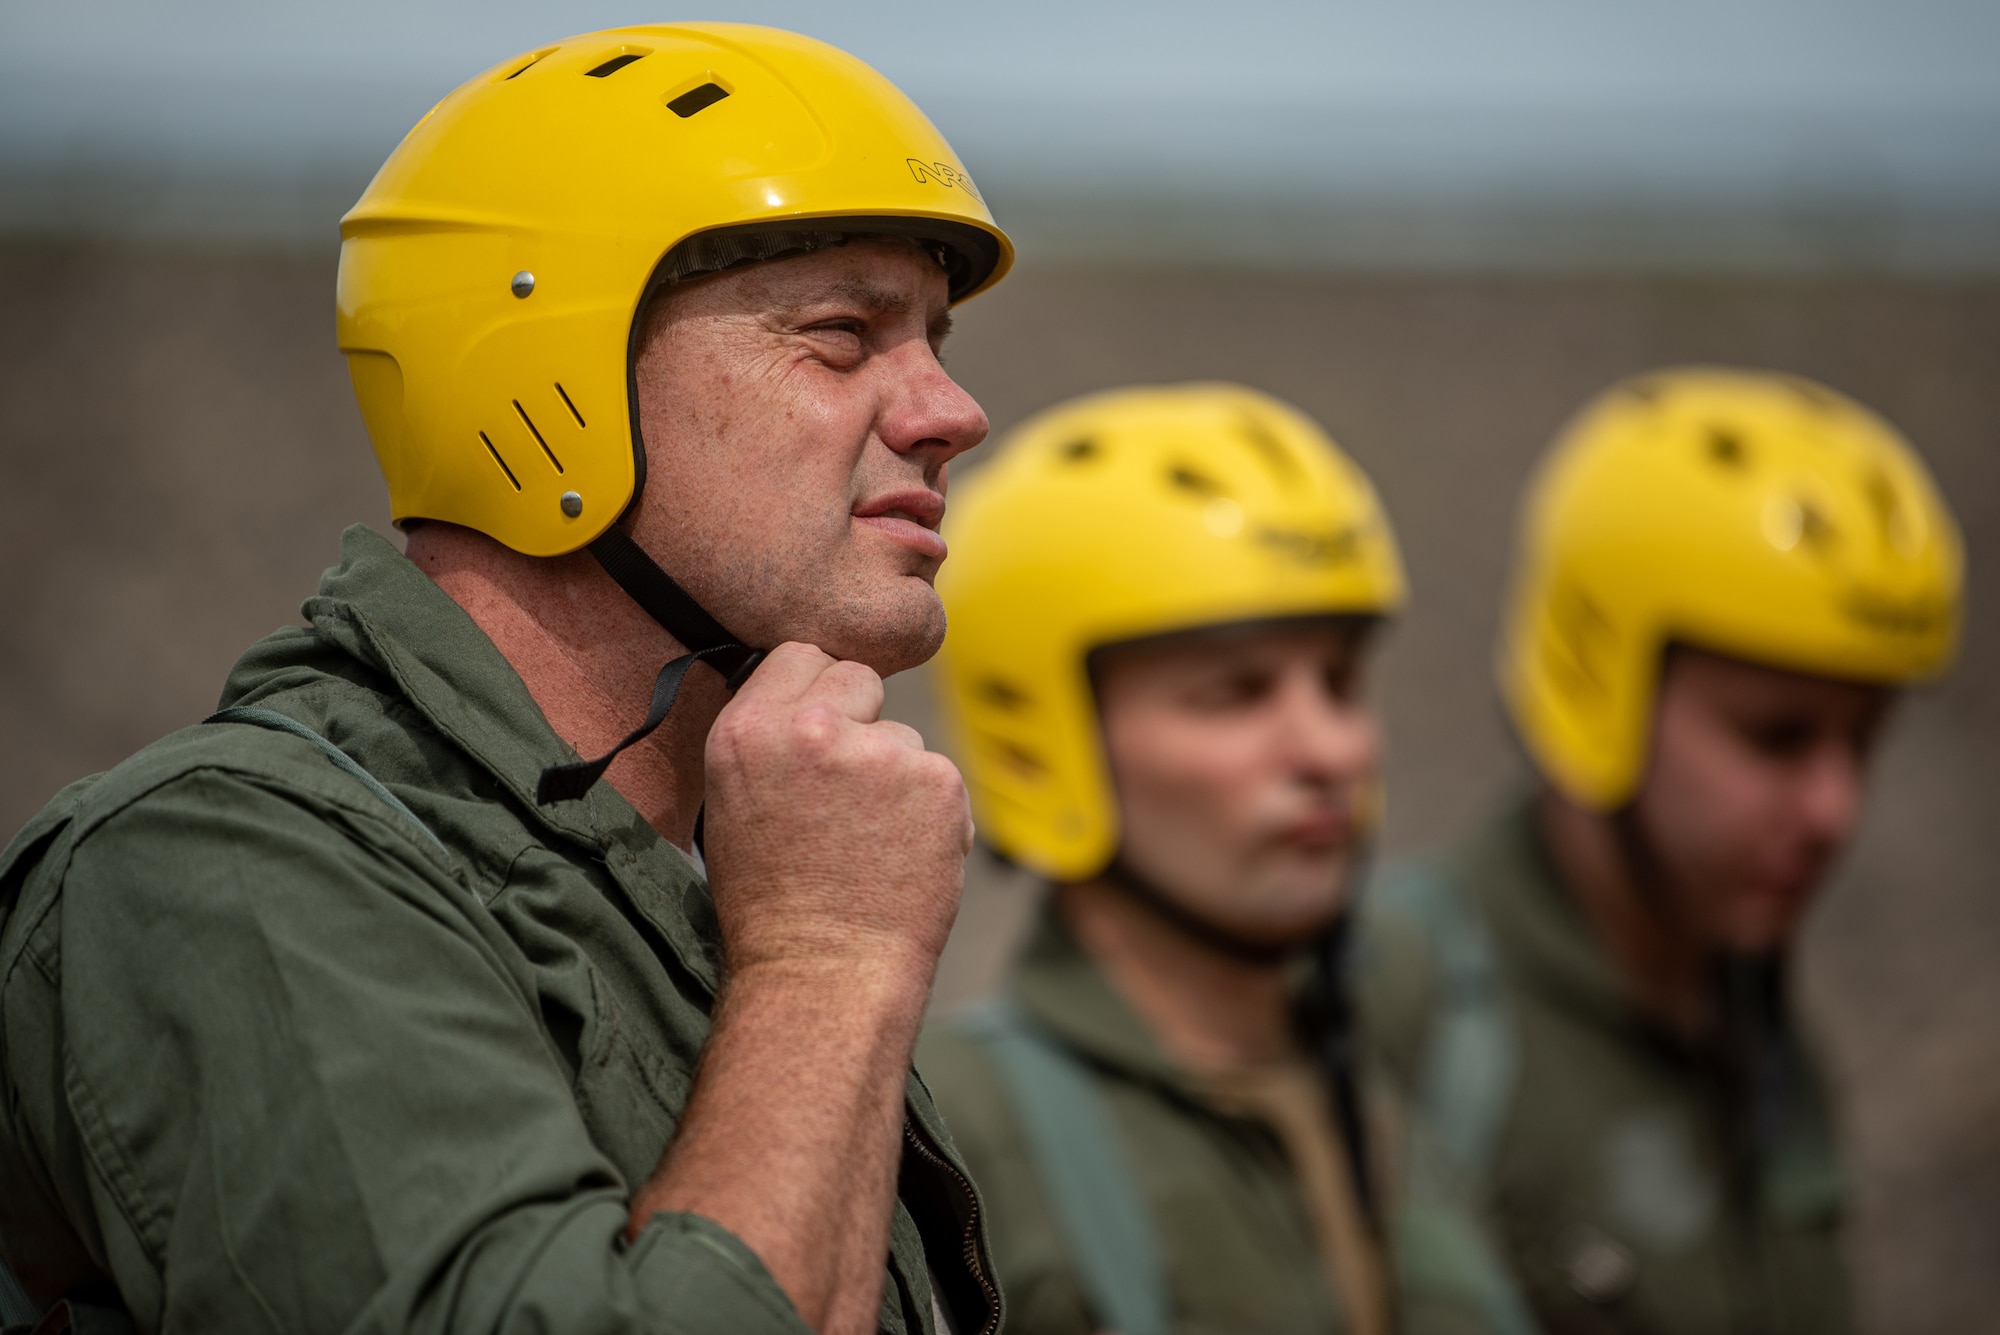 Maj. Andrew Hutchinson, a pilot for the Kentucky Air National Guard’s 165th Airlift Squadron, dons a safety helmet in preparation for water survival training at Taylorsville Lake in Spencer County, Ky., Sept. 10, 2022. The annual training refreshes aircrew members on skills learned during U.S. Air Force Survival School. (U.S. Air National Guard photo by Tech. Sgt. Joshua Horton)